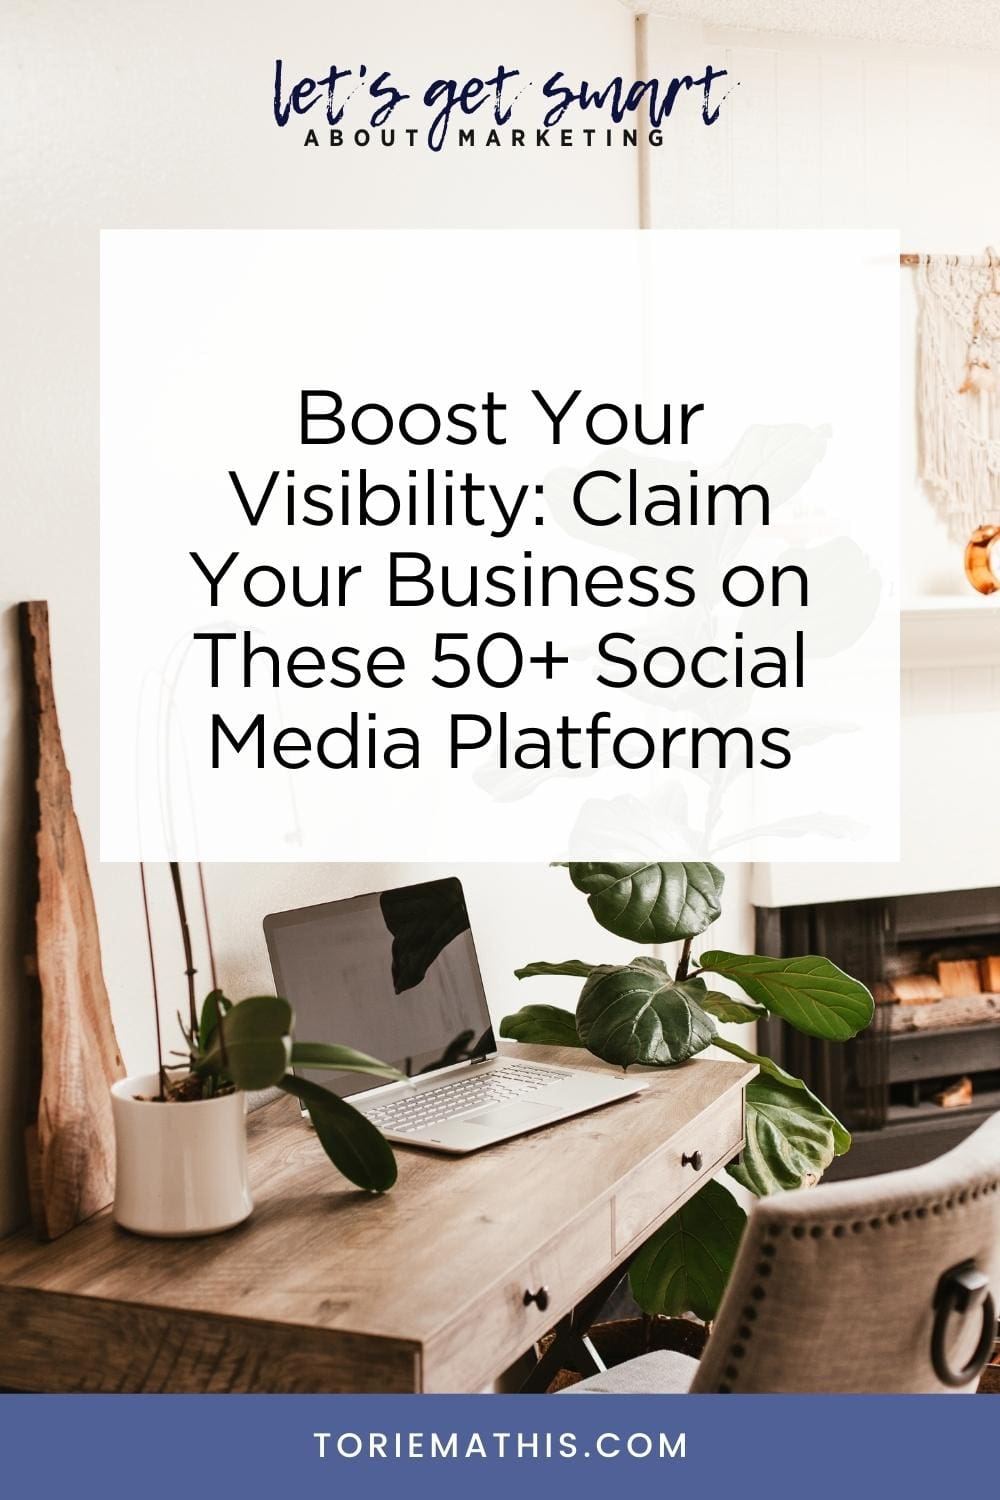 Boost Your Visibility Claim Your Business on These 50+ Online Directories and Social Media Platforms